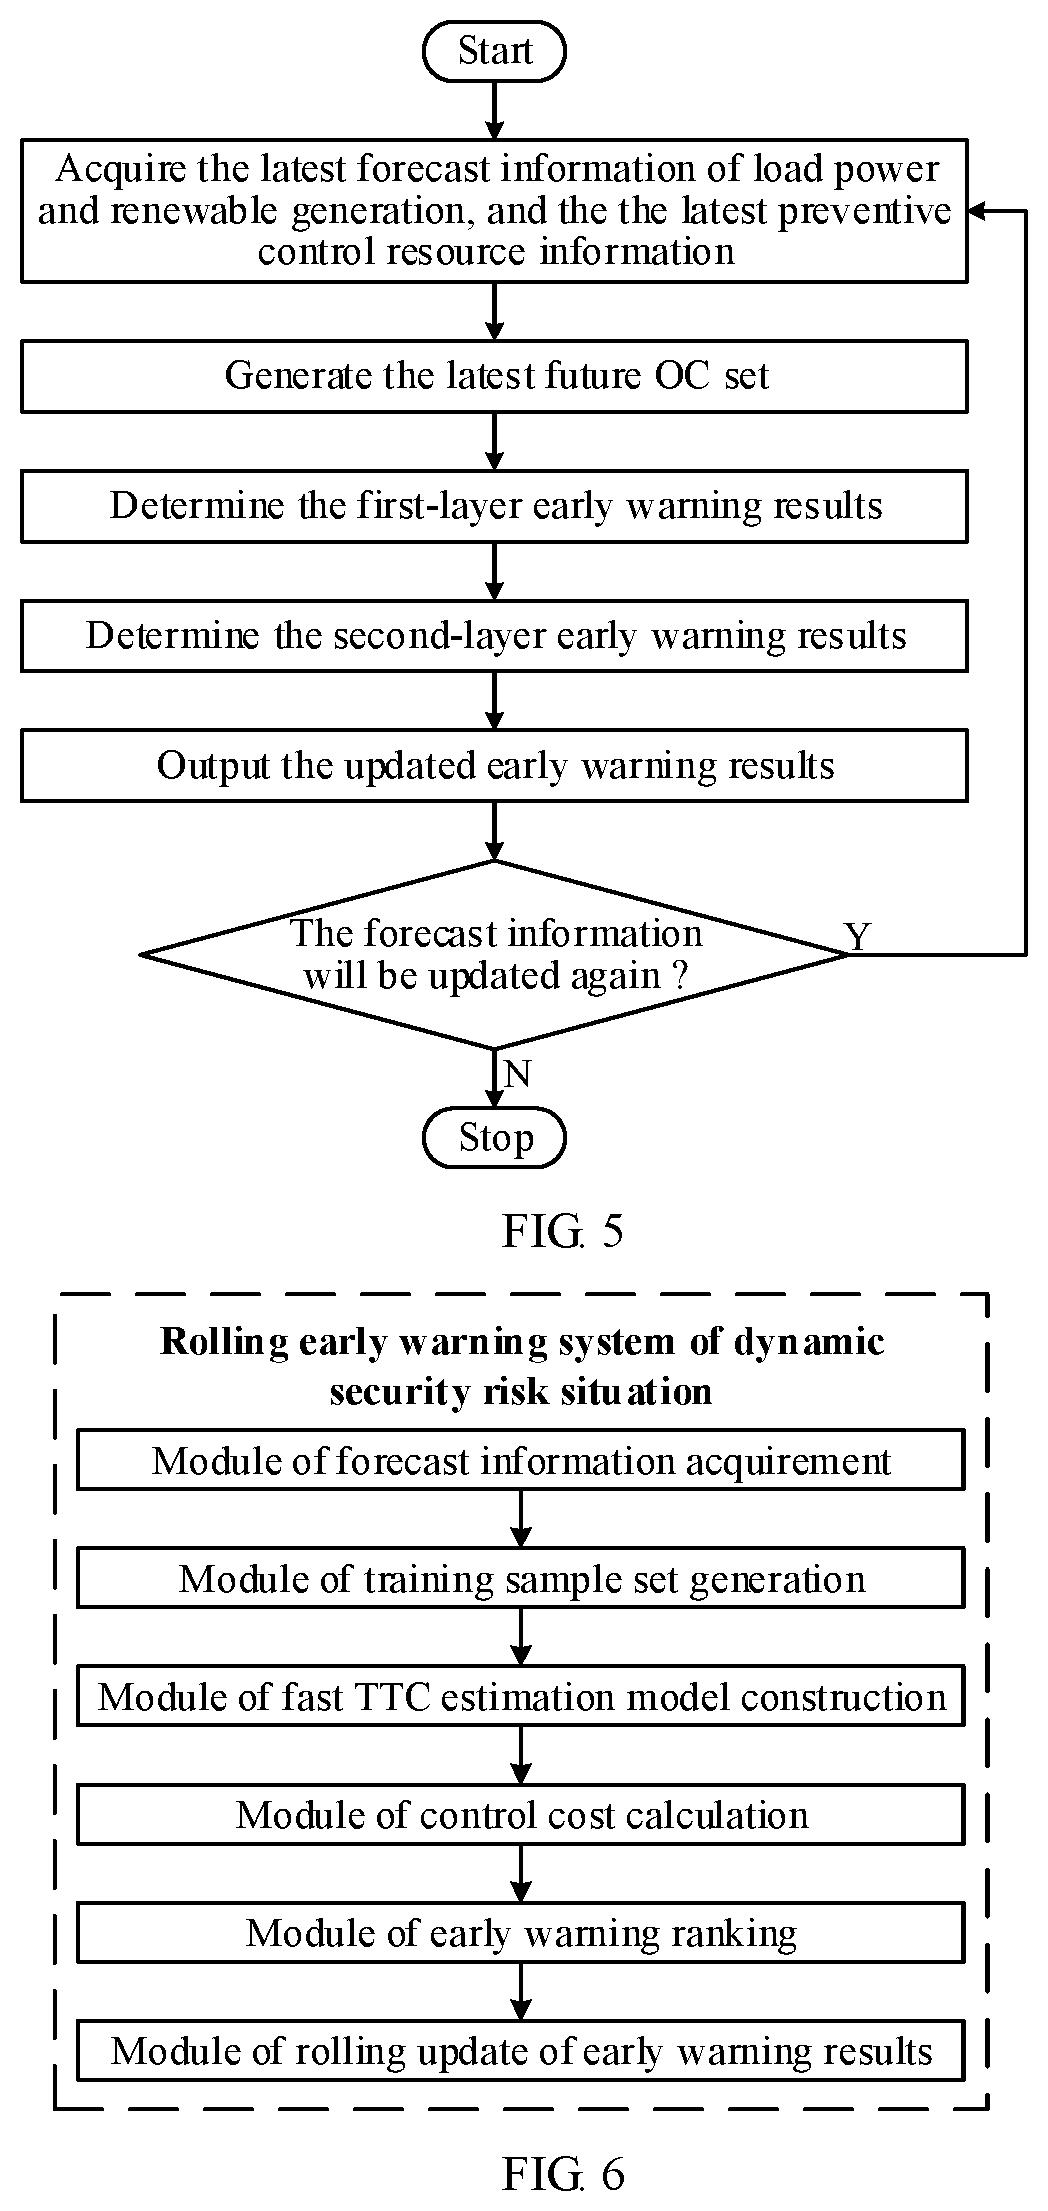 Rolling early warning method and system of dynamic security risk situation for large scale hybrid ac/dc grids